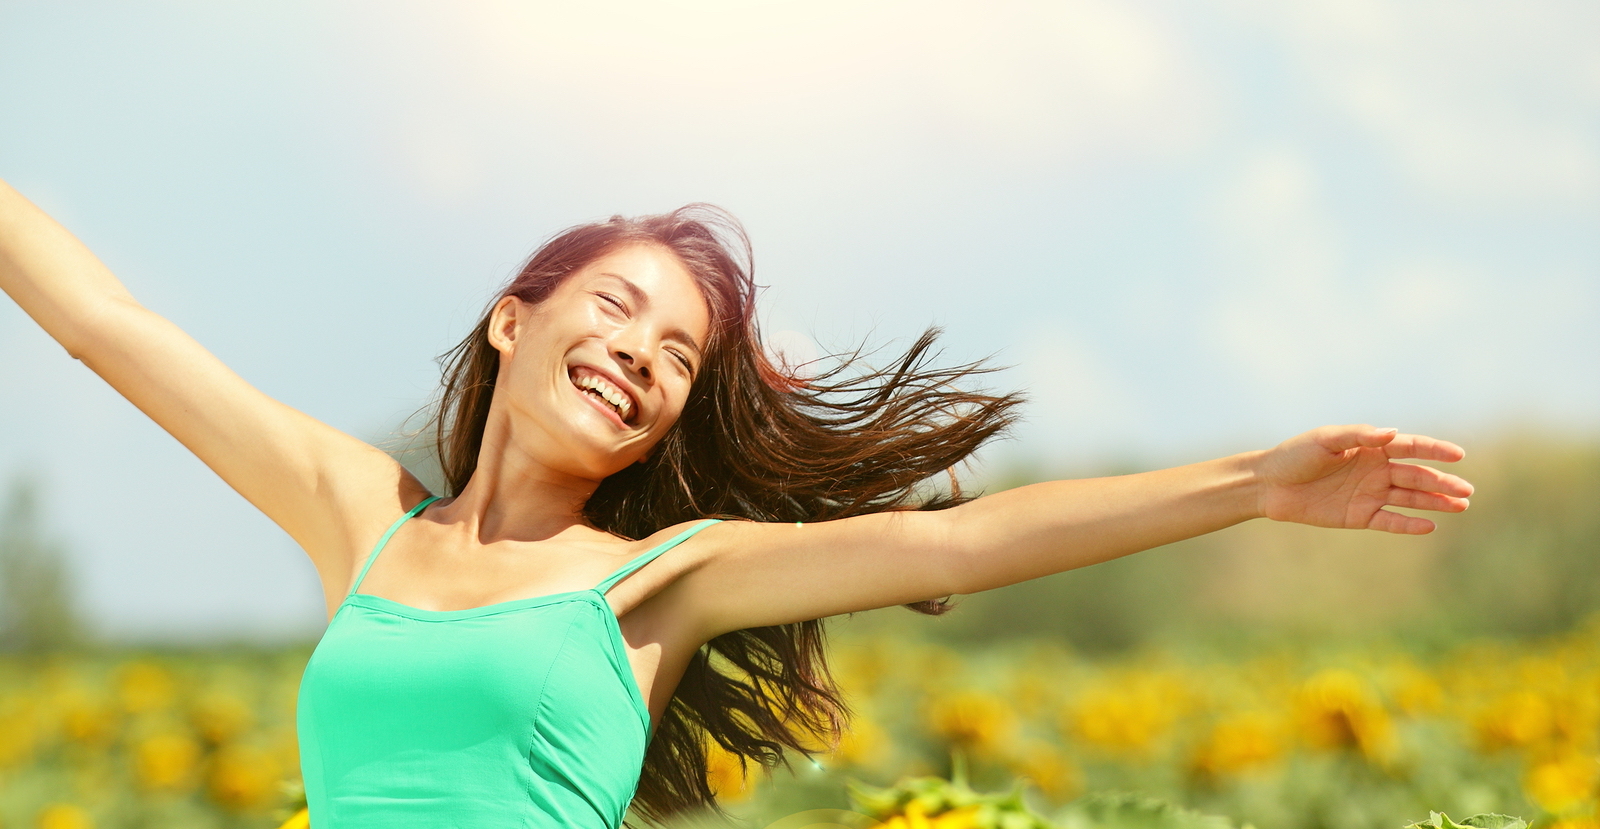 Happy woman in sunflower field. Summer girl in flower field cheerful and joyful. Multiracial Asian Caucasian young woman dancing, smiling elated and serene with arms raised up.